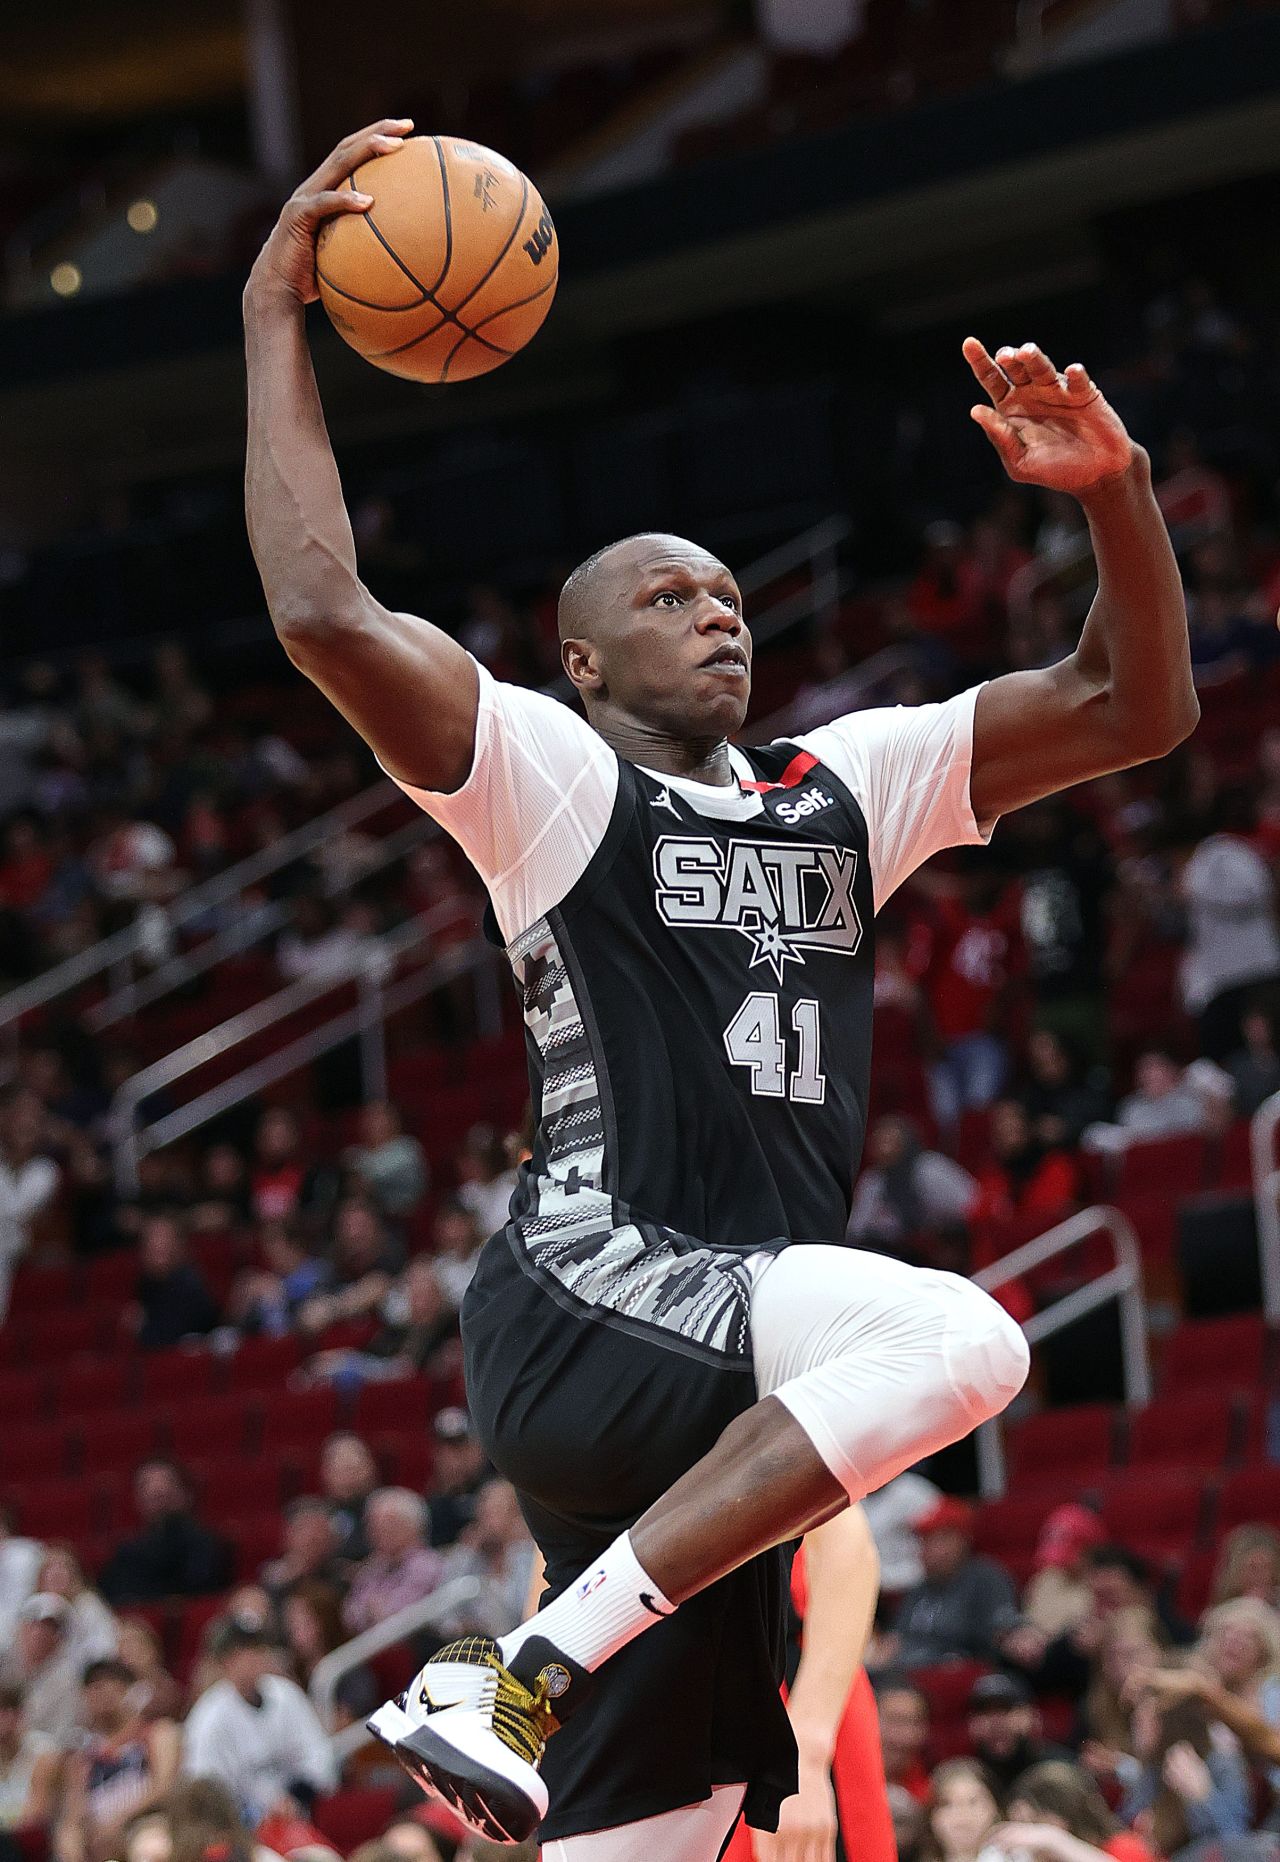 When Gorgui Dieng signed a $64 million four-year contract extension with the Minnesota Timberwolves in 2016, it was the most valuable ever signed by a Senegalese player. He was also the first player to make it to the NBA from the SEED Project -- a non-profit that uses basketball as a platform to engage youth in academic, athletic and leadership programs. Dieng has been recognized by the NBA for <a href="https://edition.cnn.com/2019/11/15/sport/gorgui-dieng-charity-award-nba-sportspeople-spt-intl/index.html" target="_blank">the work done by his foundation in Senegal</a>.